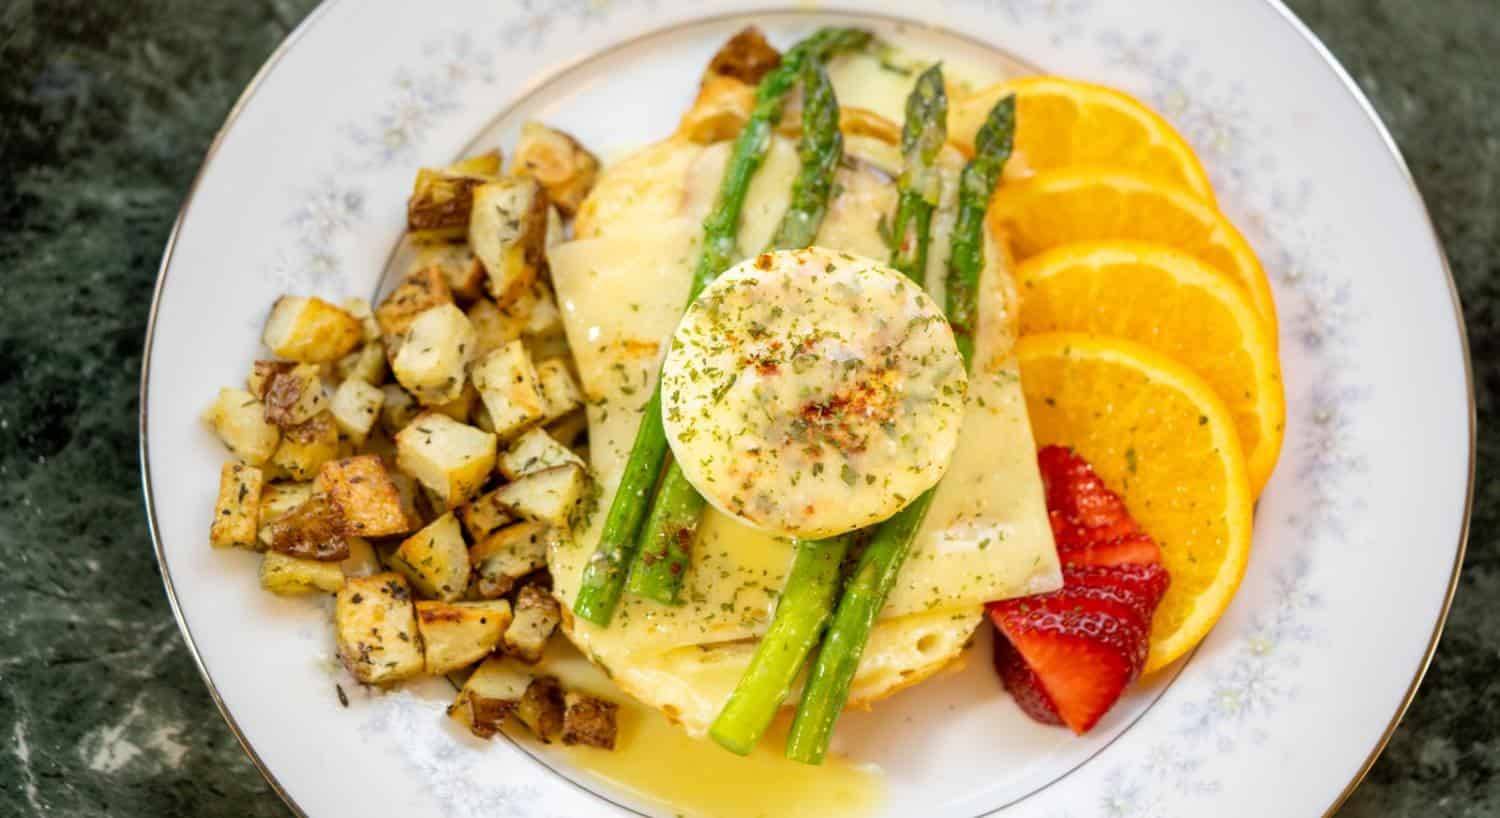 Close up view of eggs benedict dish topped with asparagus with country potatoes on one side and sliced strawberries and oranges on the other side